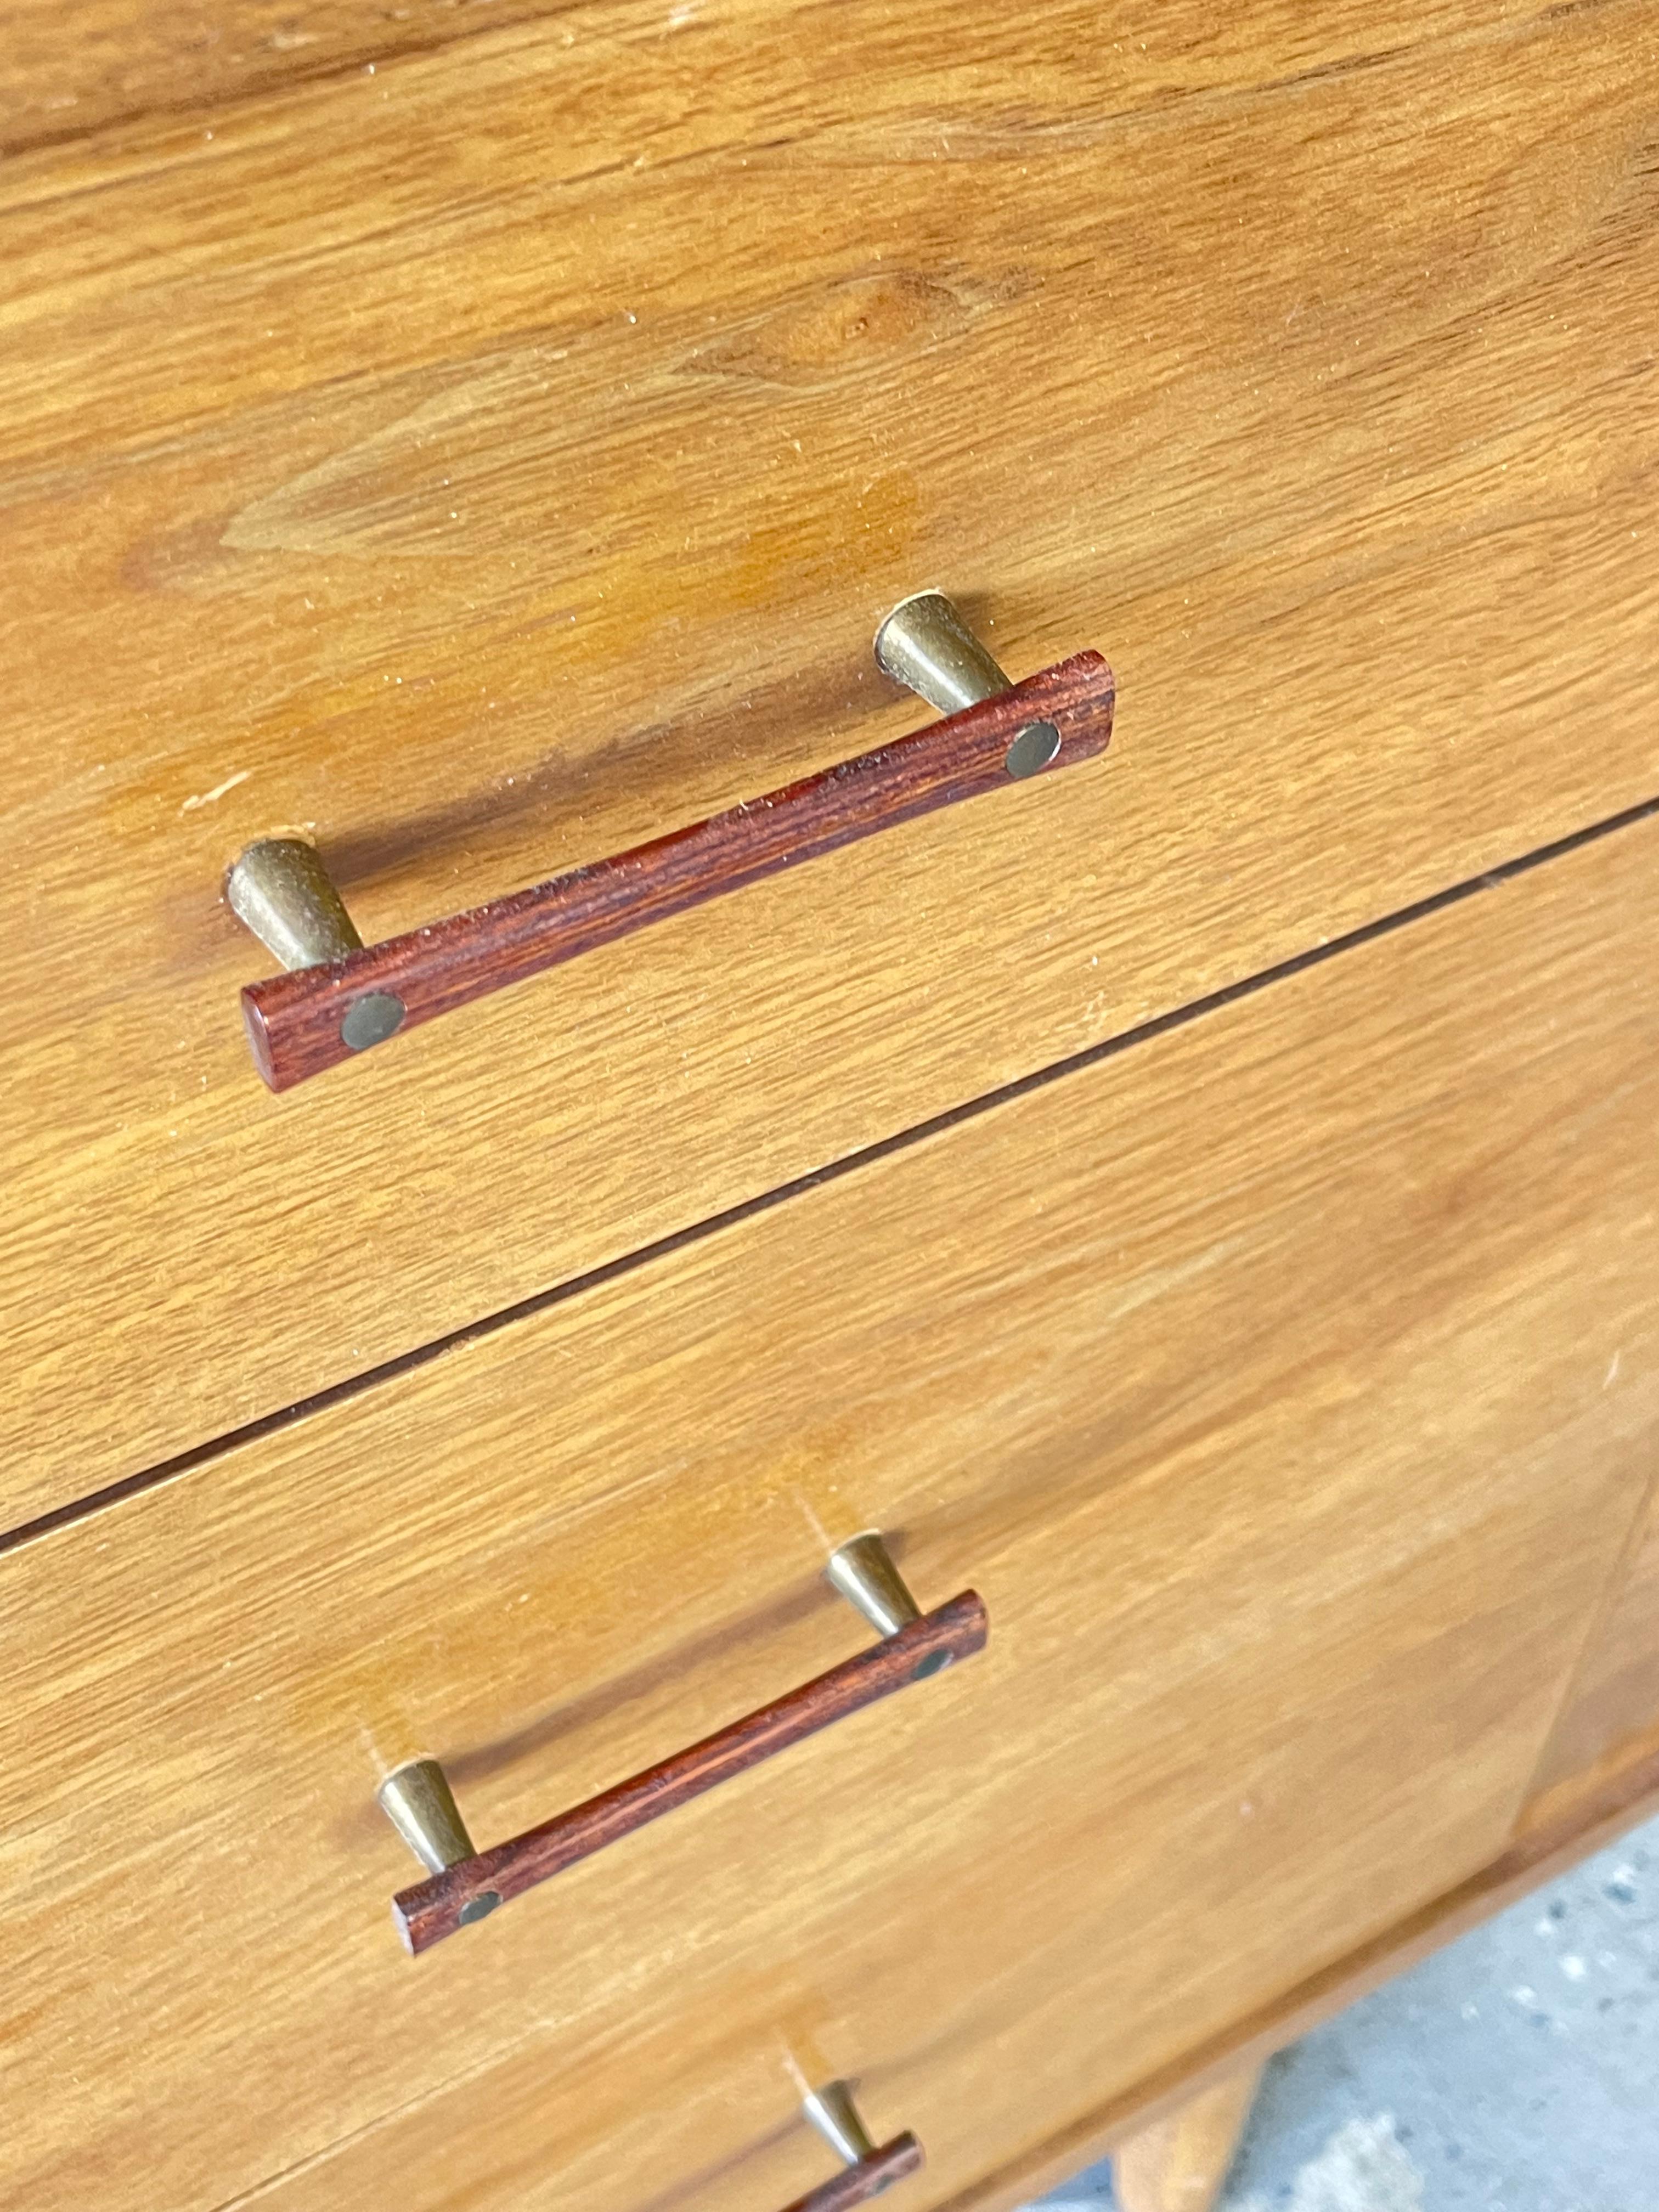 1960s Kroehler Mid-Century Modern Walnut Lowboy Dresser with Rosewood Handles In Good Condition For Sale In Las Vegas, NV